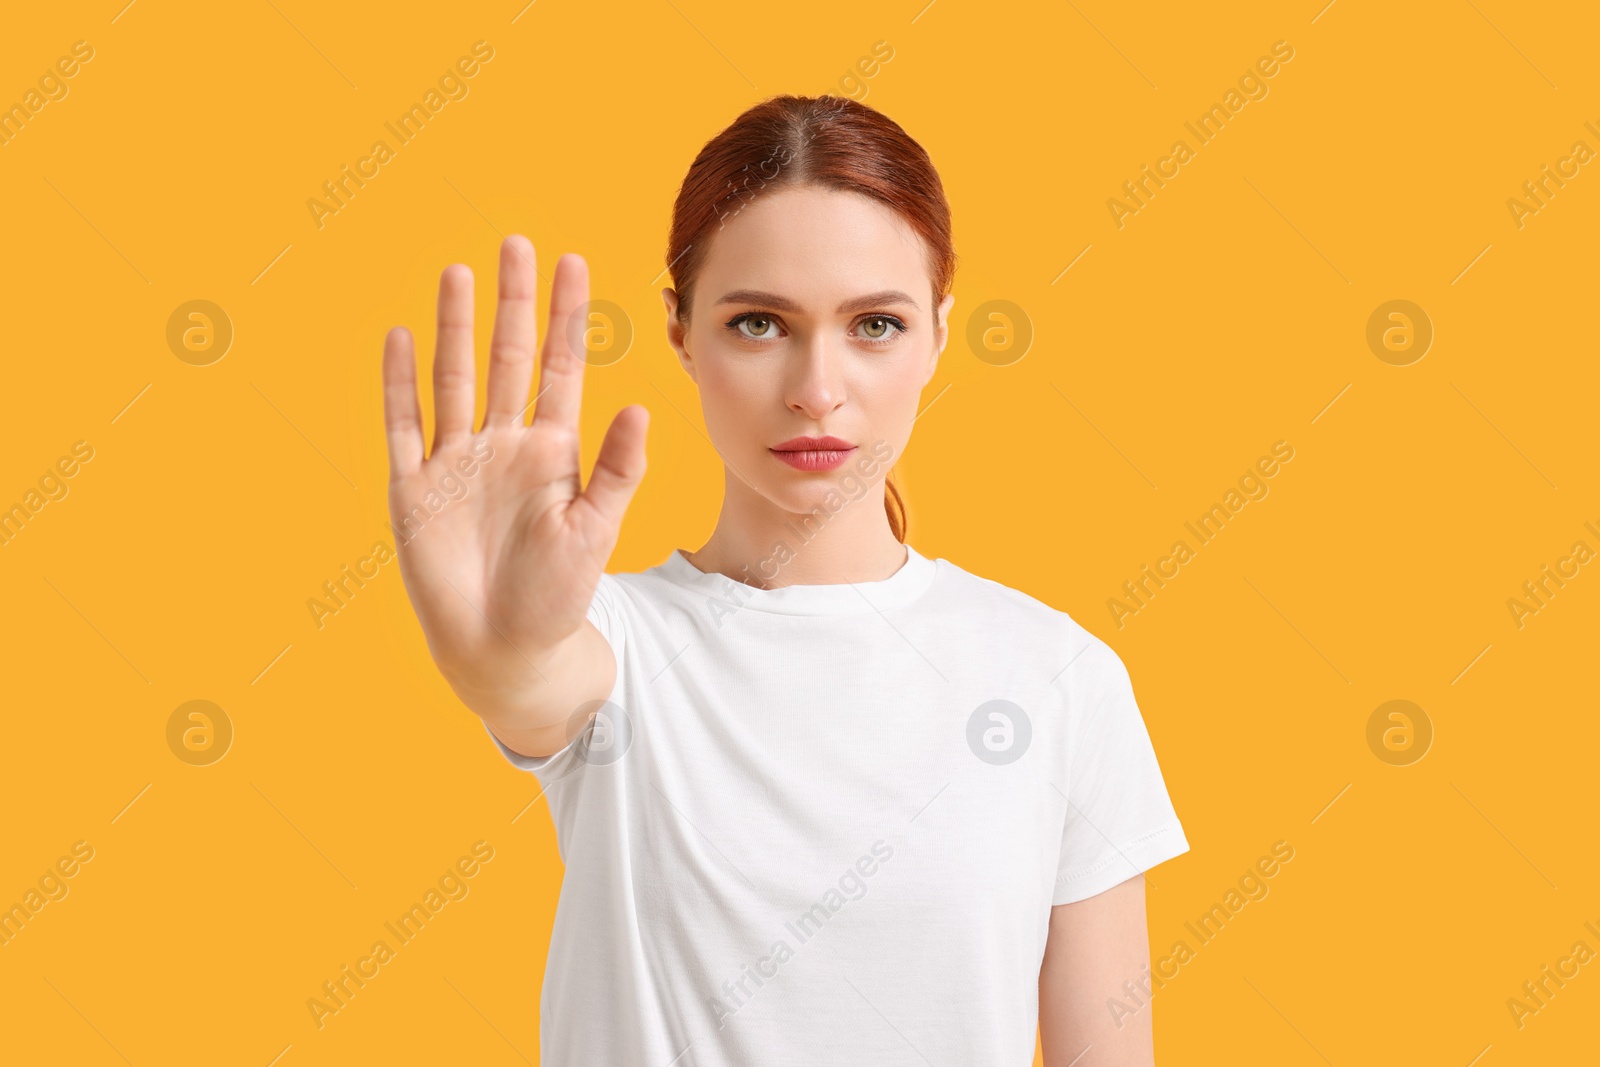 Photo of Woman showing stop gesture on yellow background